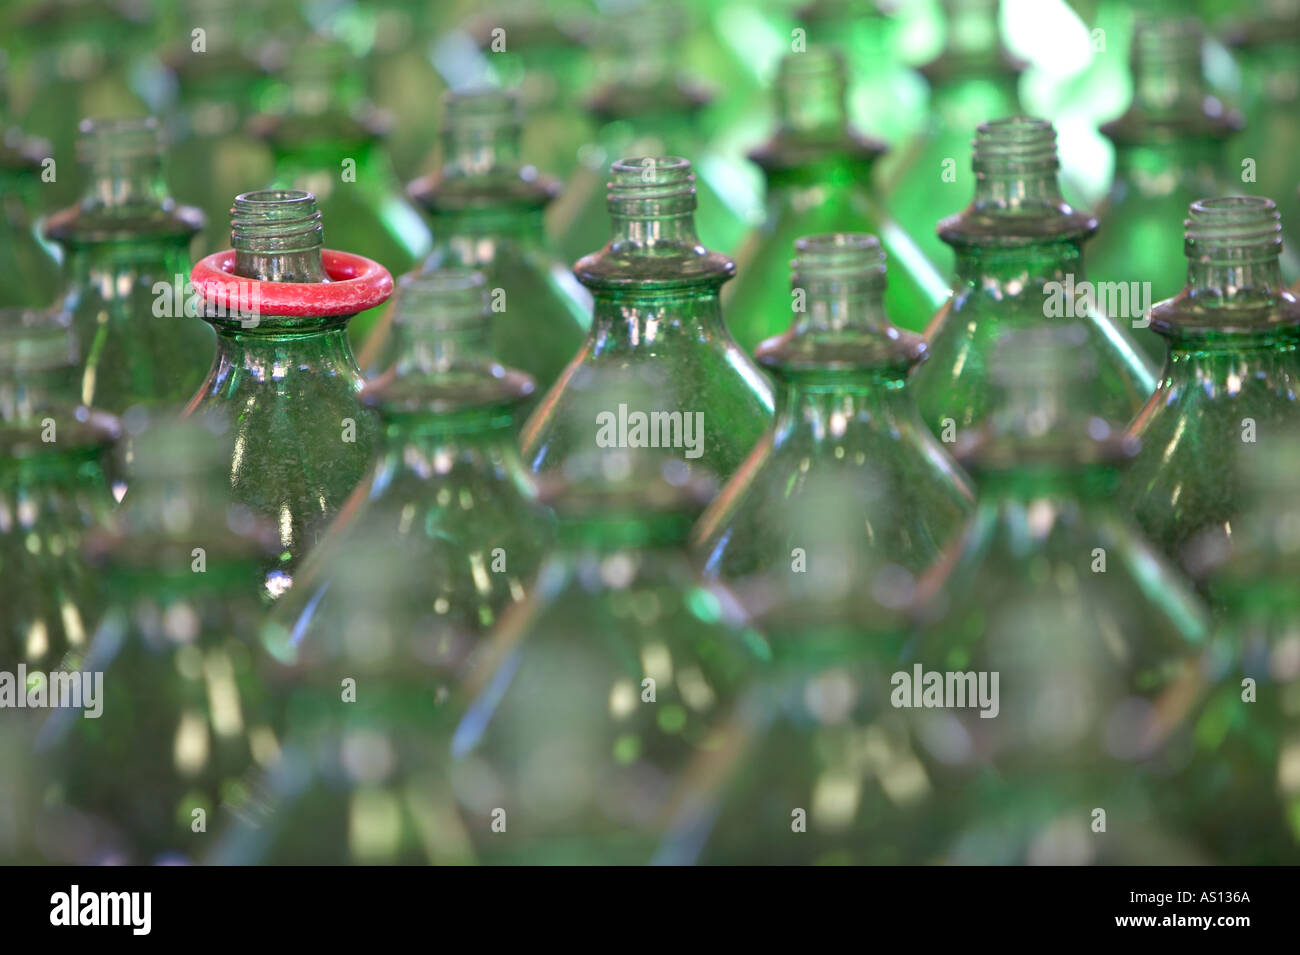 Rows of transparent green bottles with one winning red ring resting on the neck of one bottle at an amusement midway Stock Photo